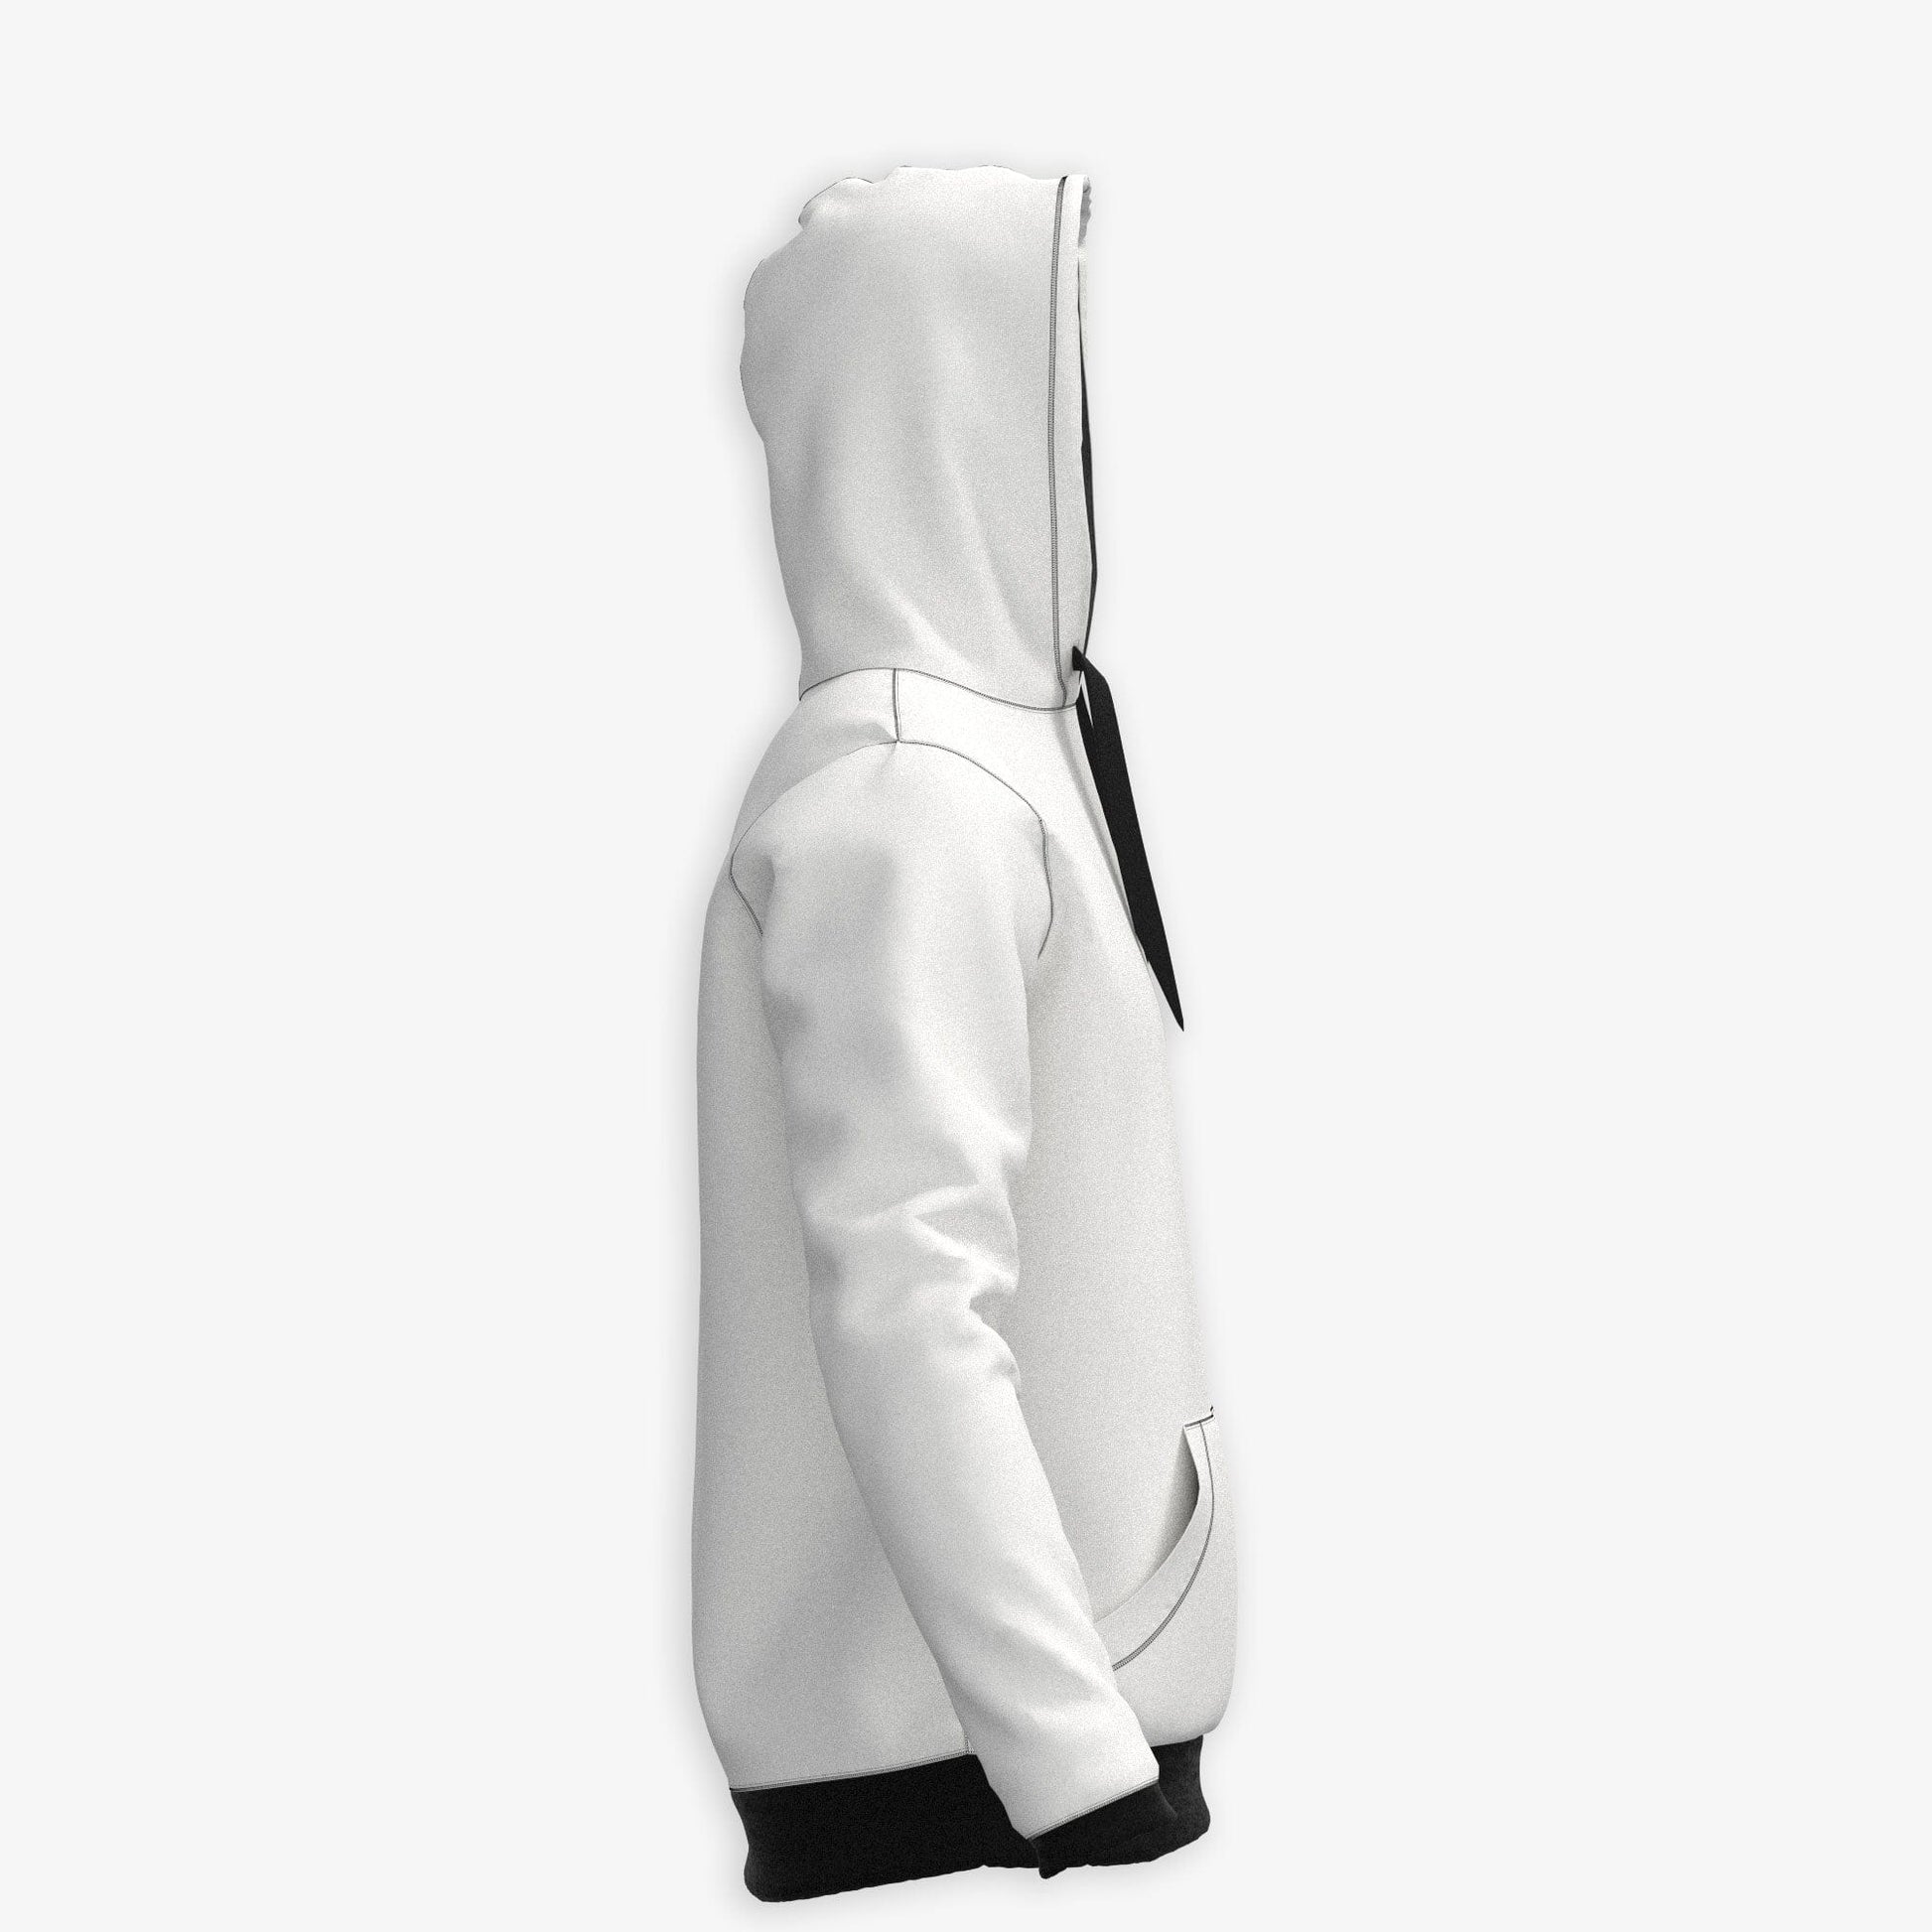 My Custom Design Physical product DryTECH Pullover Hoodie